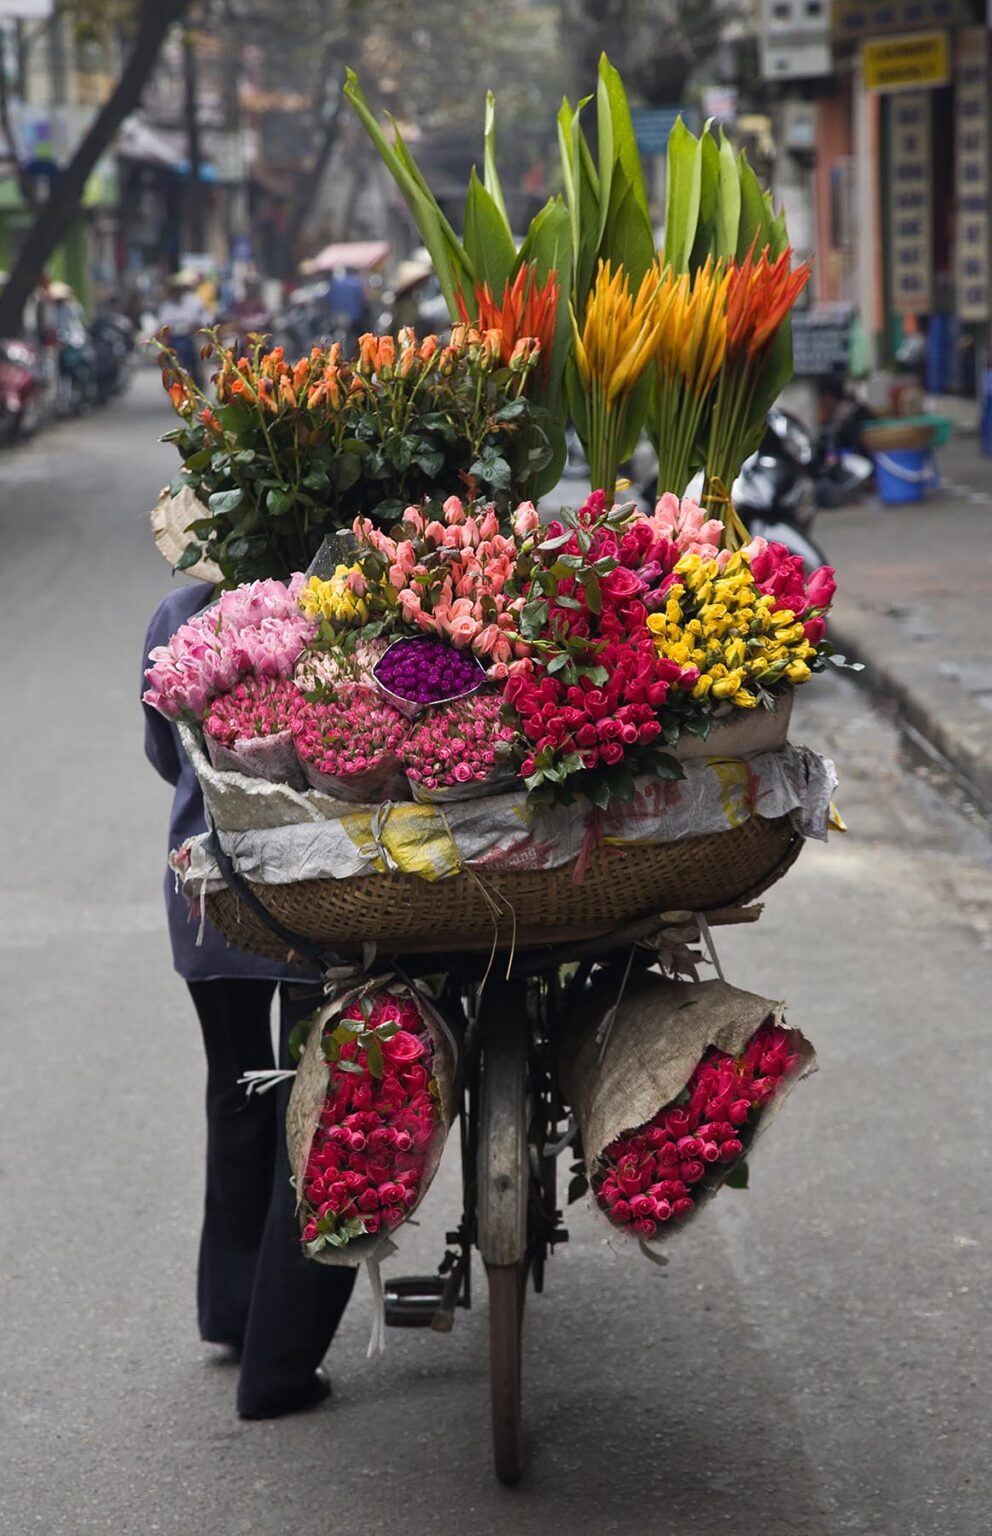 A flower merchant uses a bicycle as a mobile store - HANOI, VIETNAM